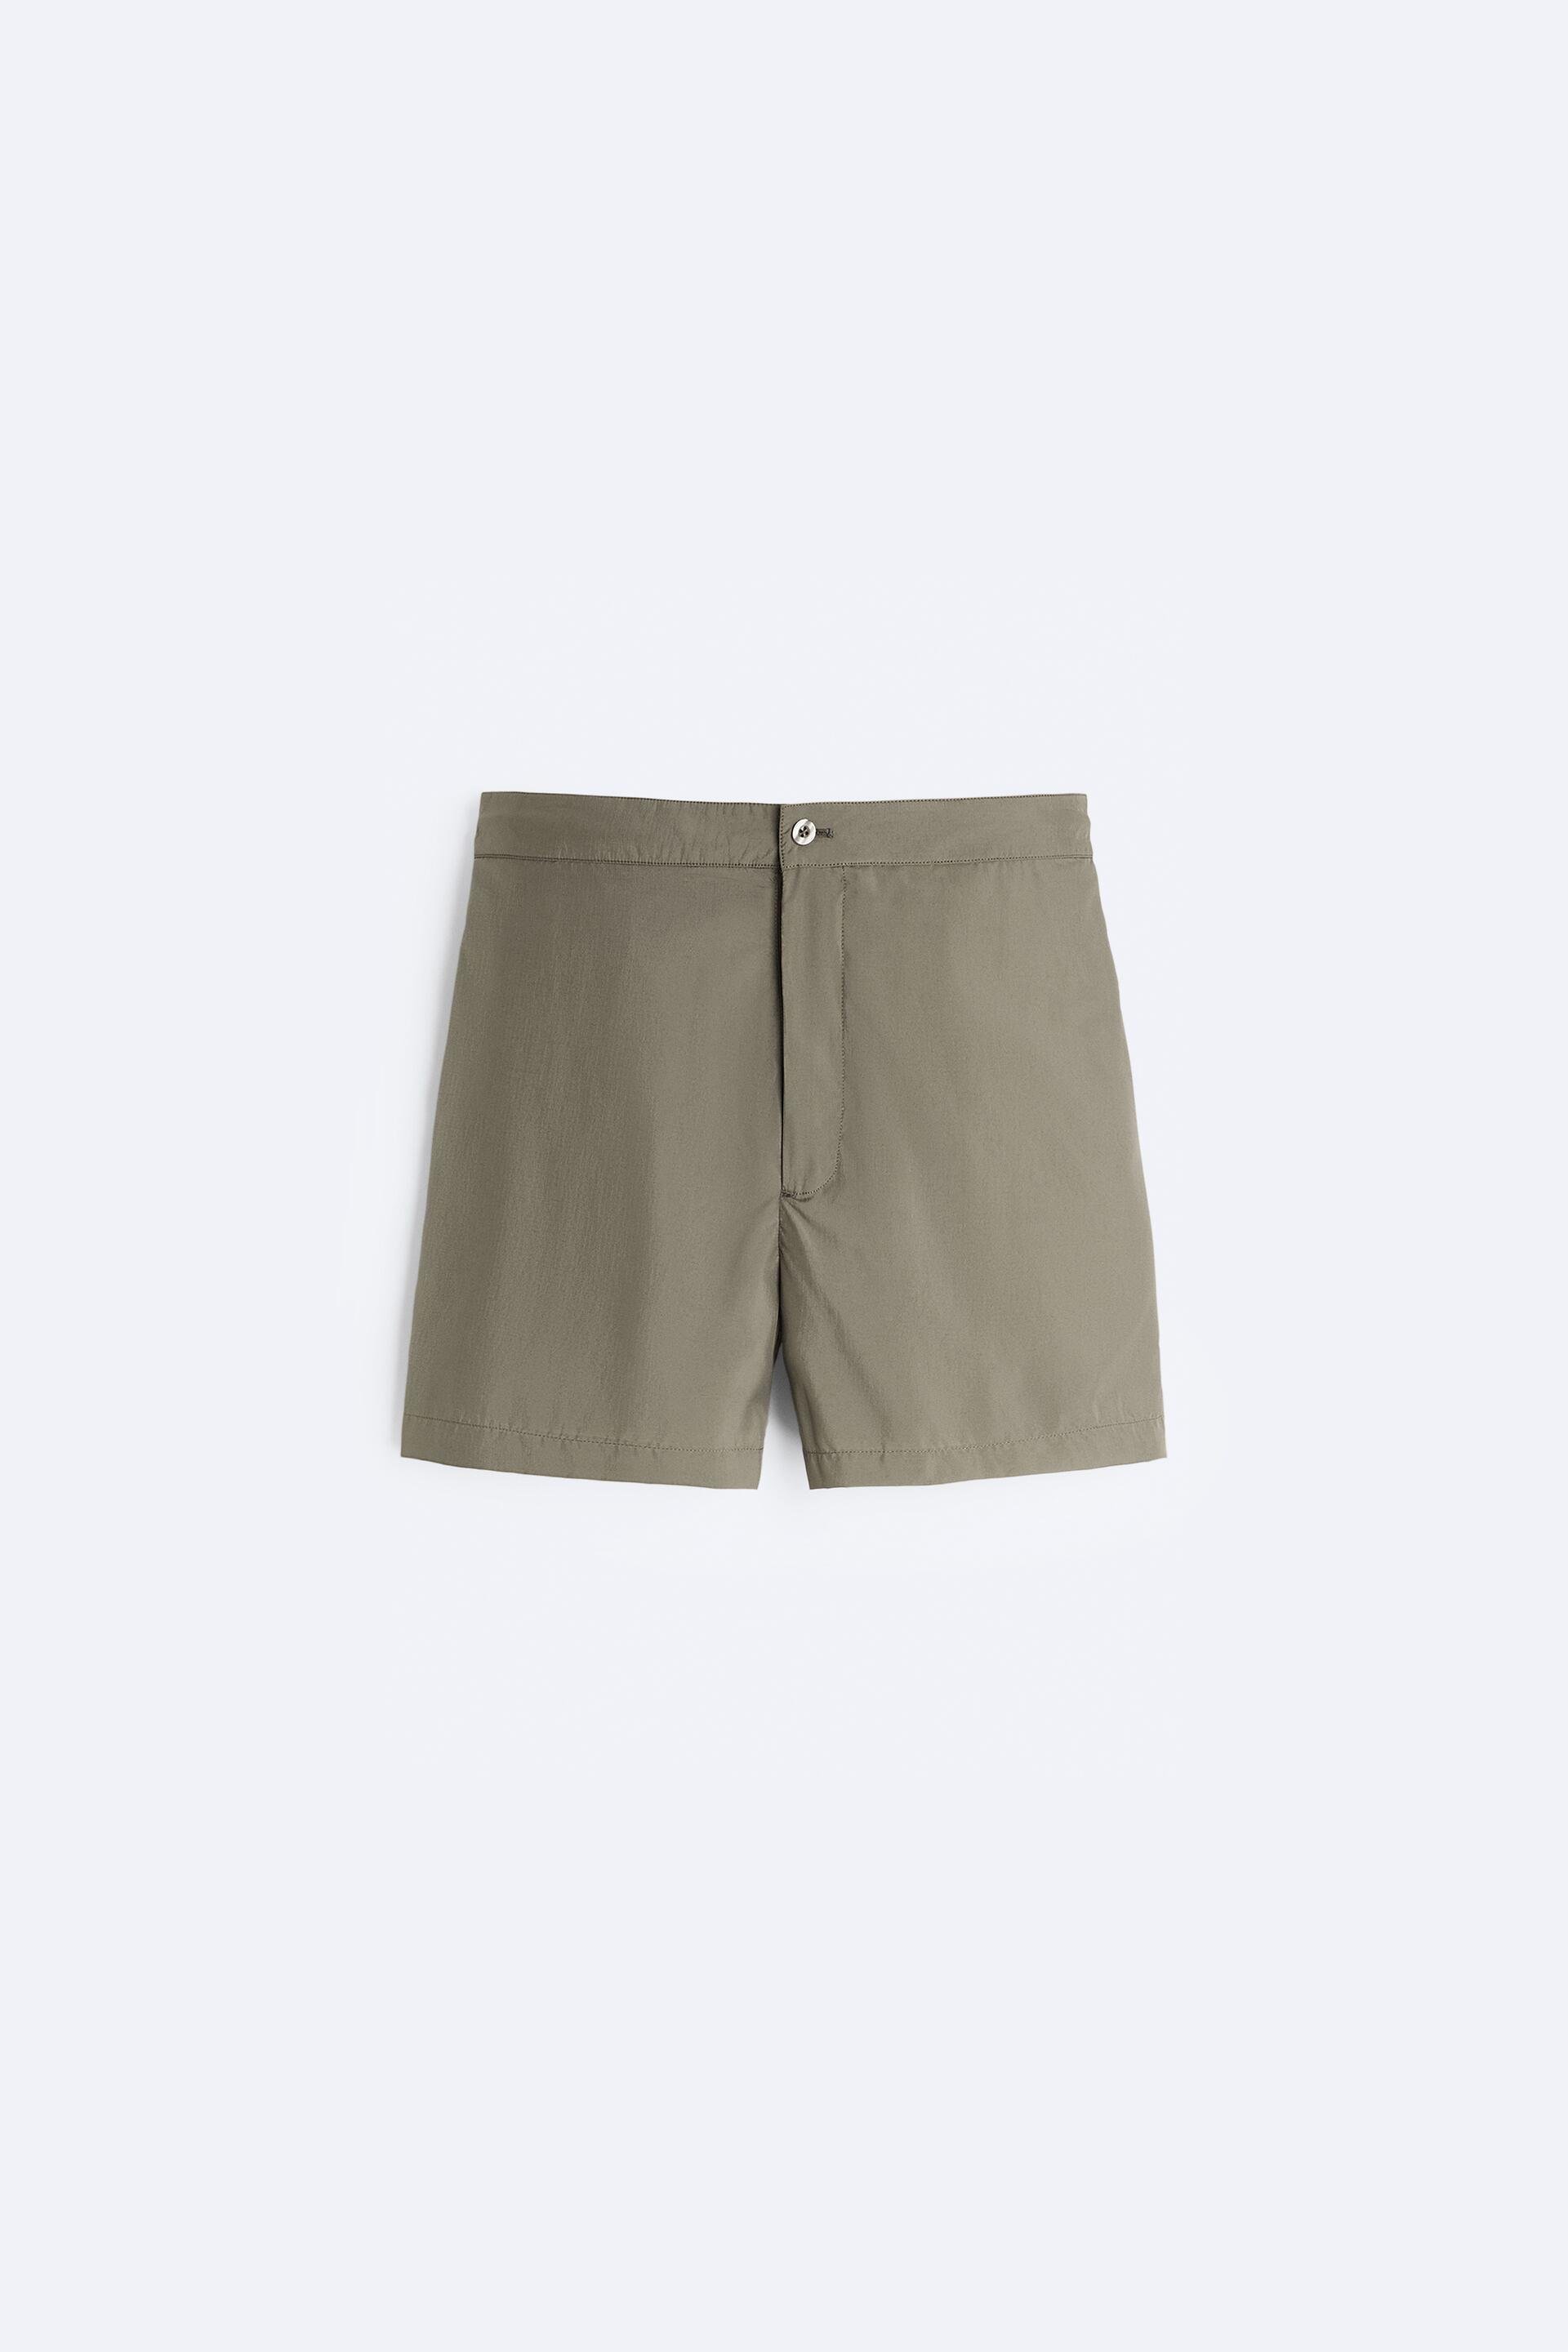 BUTTON SWIMMING TRUNKS by ZARA